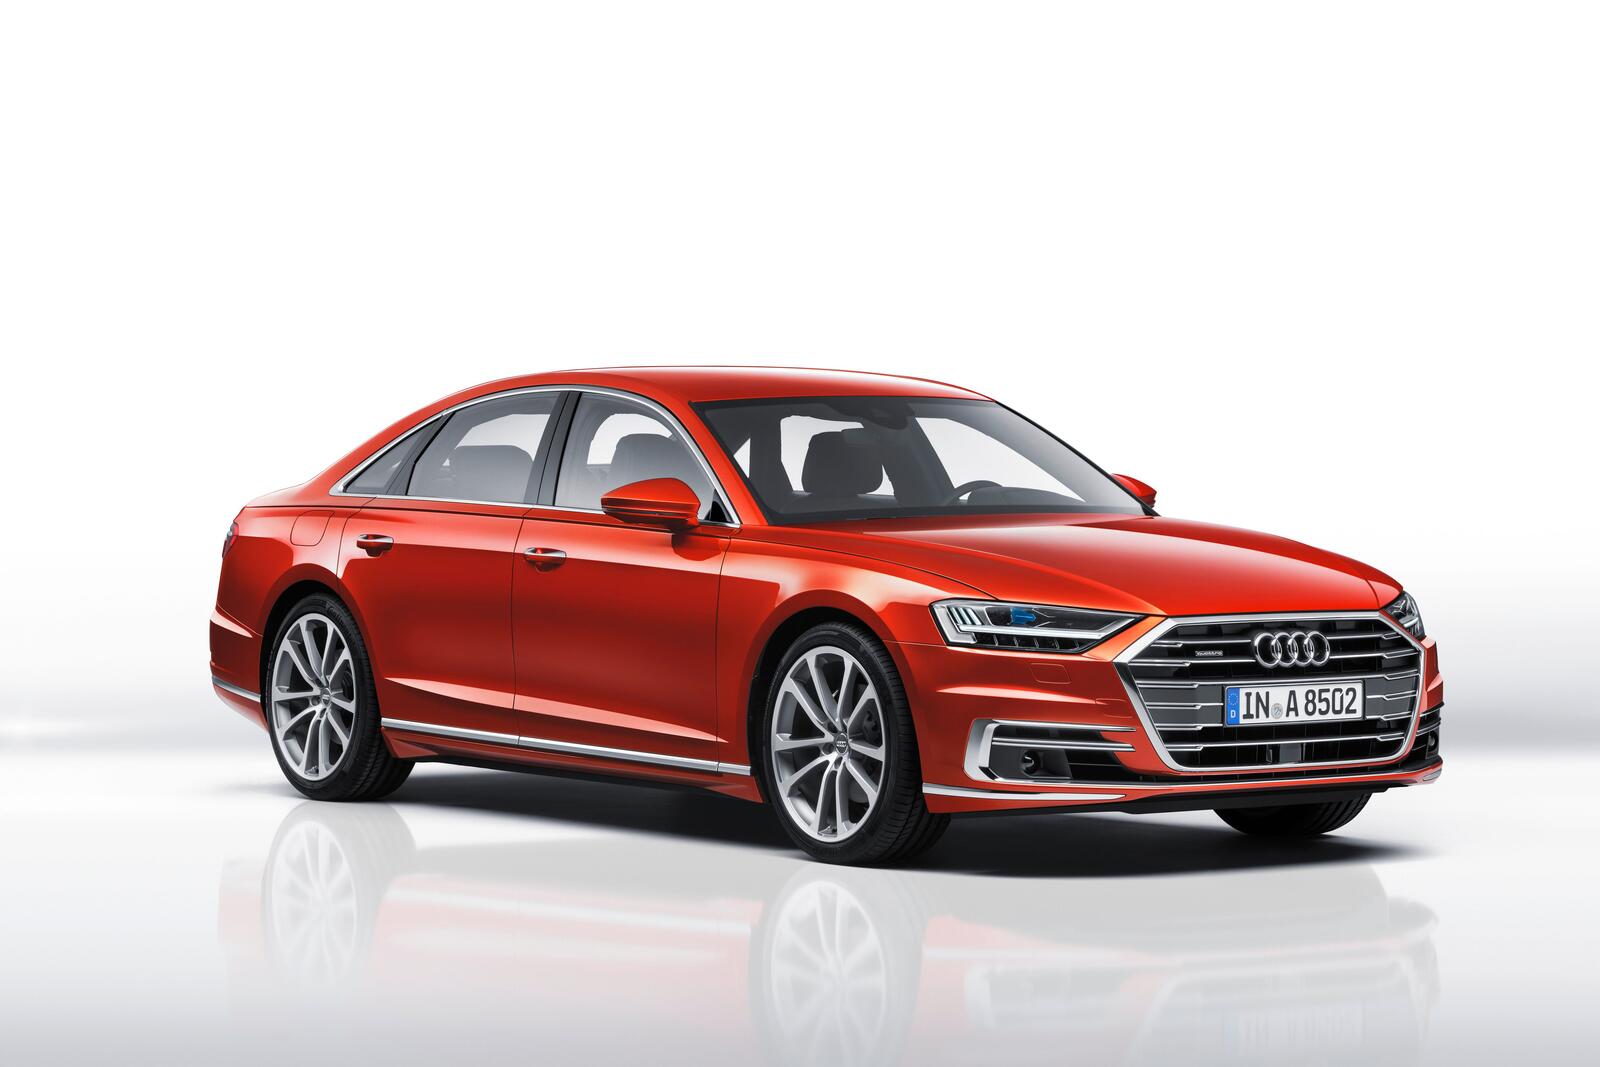 Wallpapers car red car Audi A8 on the desktop